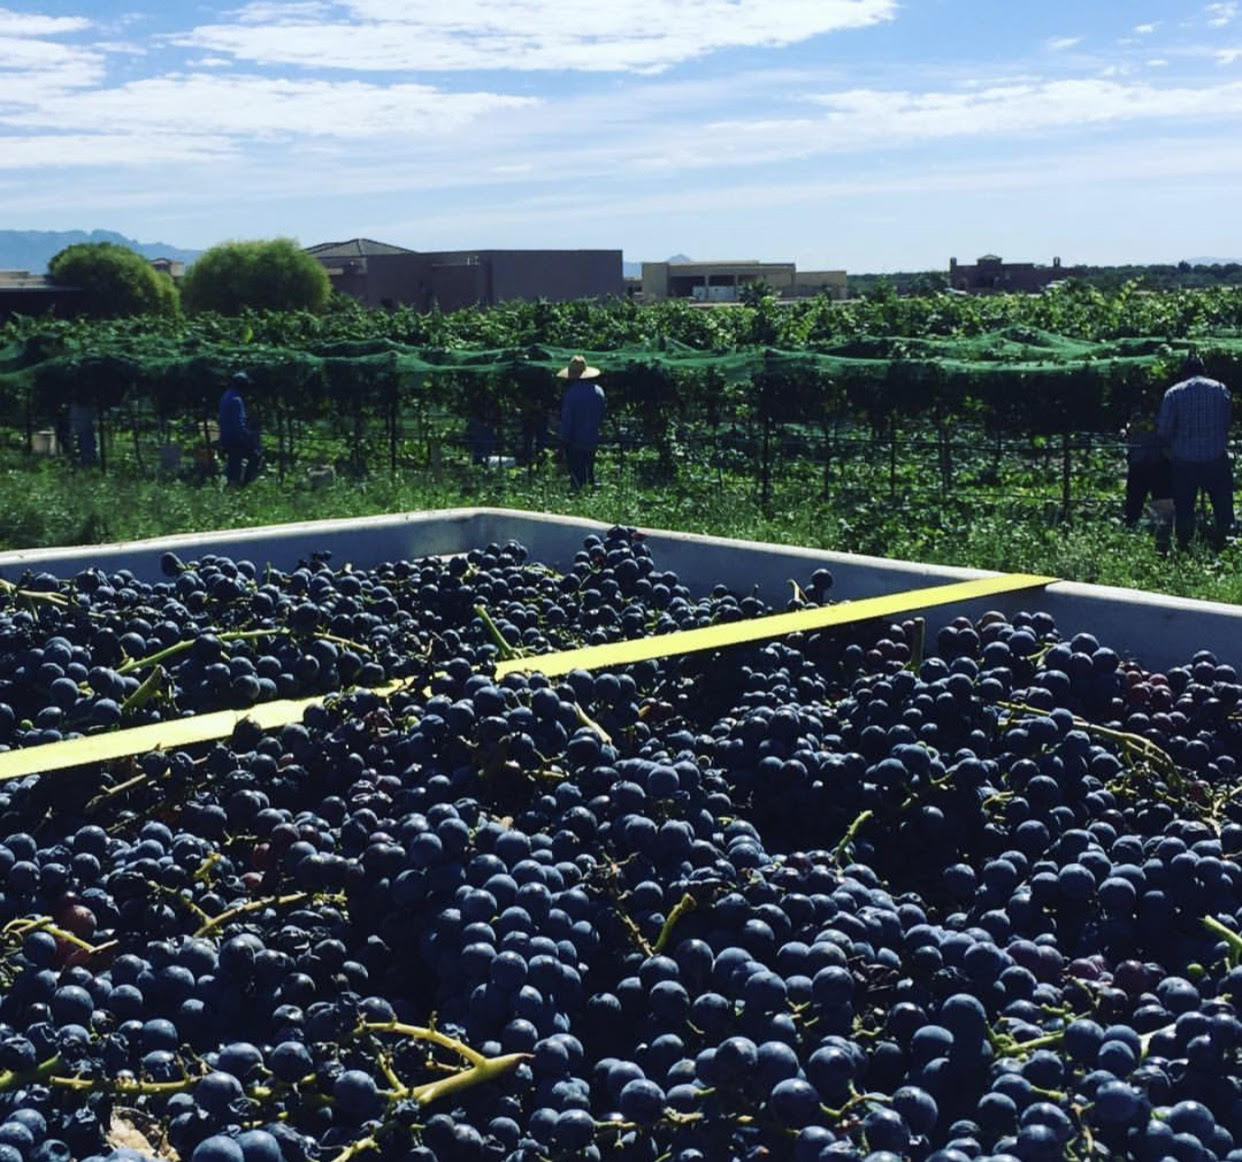 Jasper Riddle of Noisy Water Winery Steps Up to the Plate for New Mexico Wine